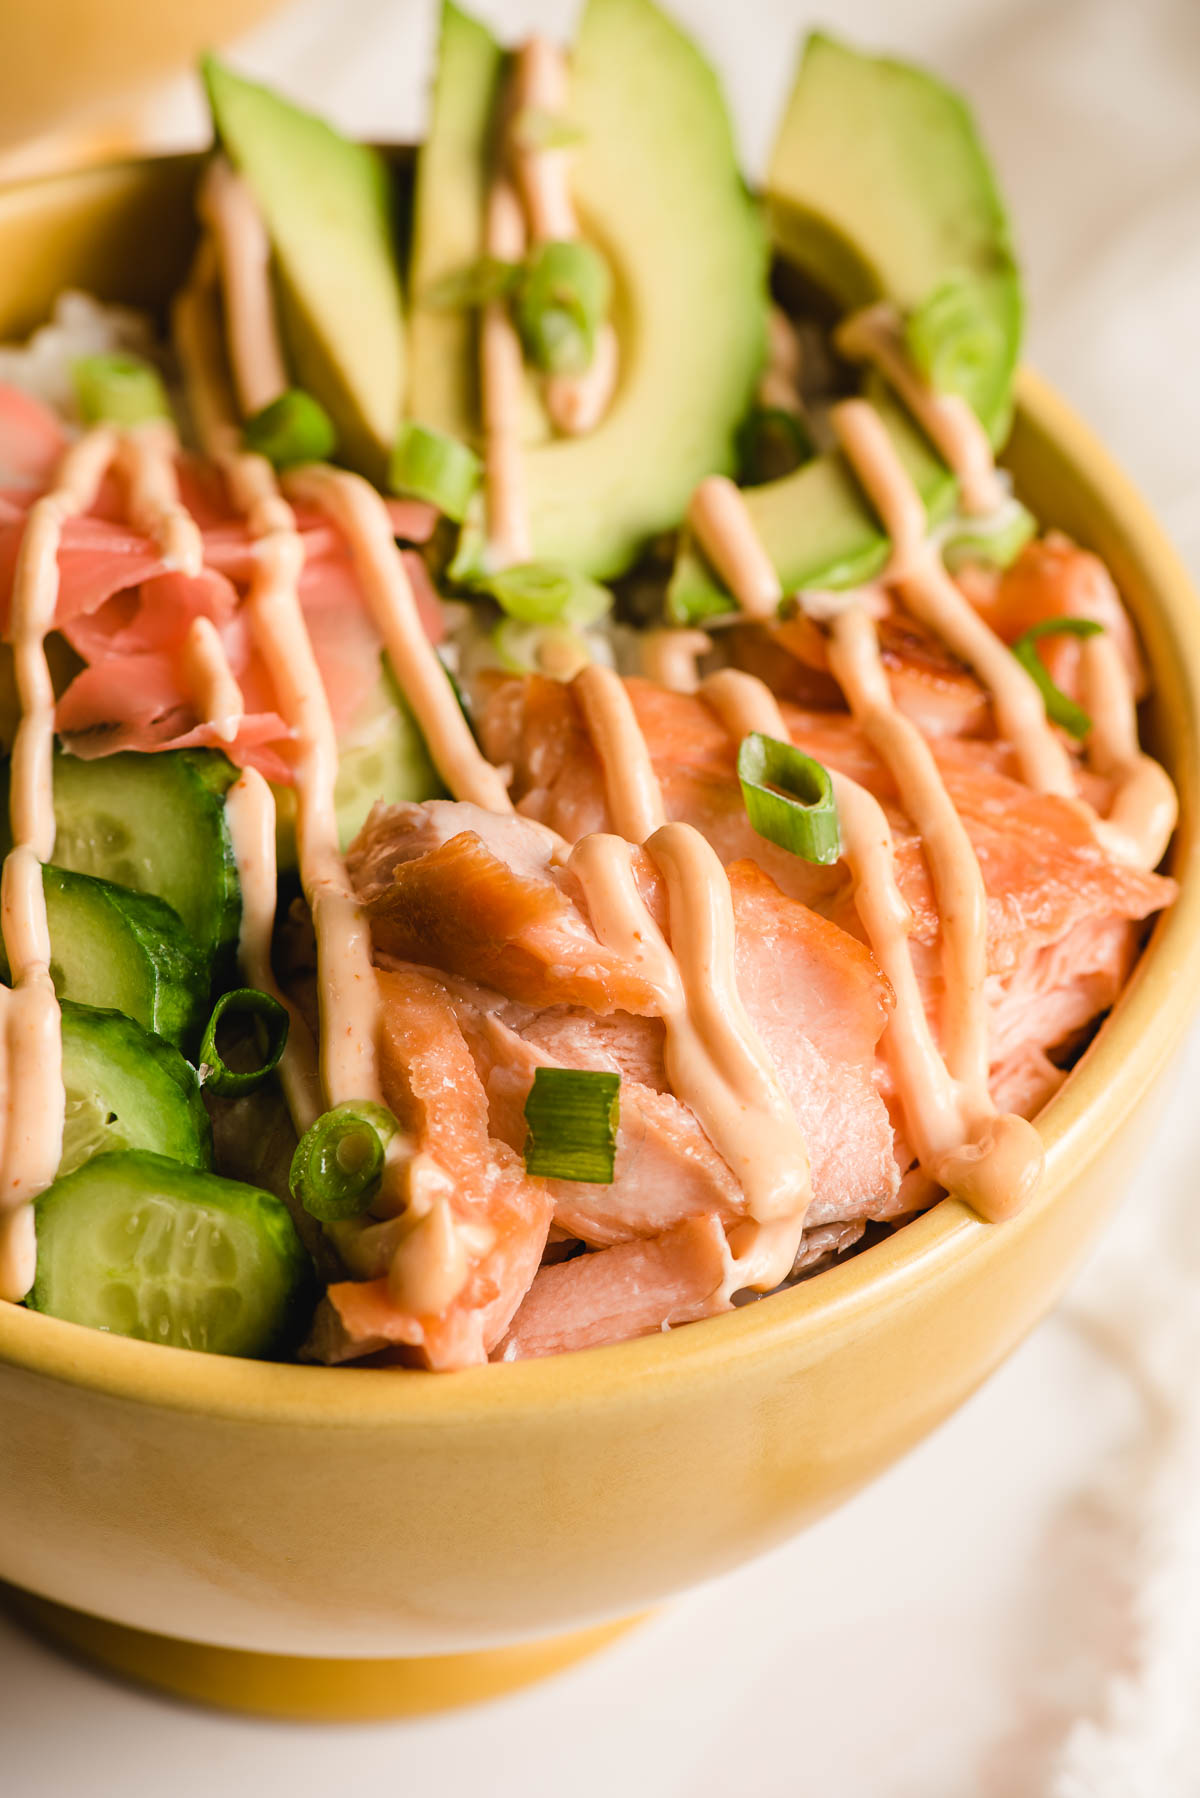 Spicy mayonnaise drizzled over broiled salmon, sliced cucumber and avocado, and sushi rice.